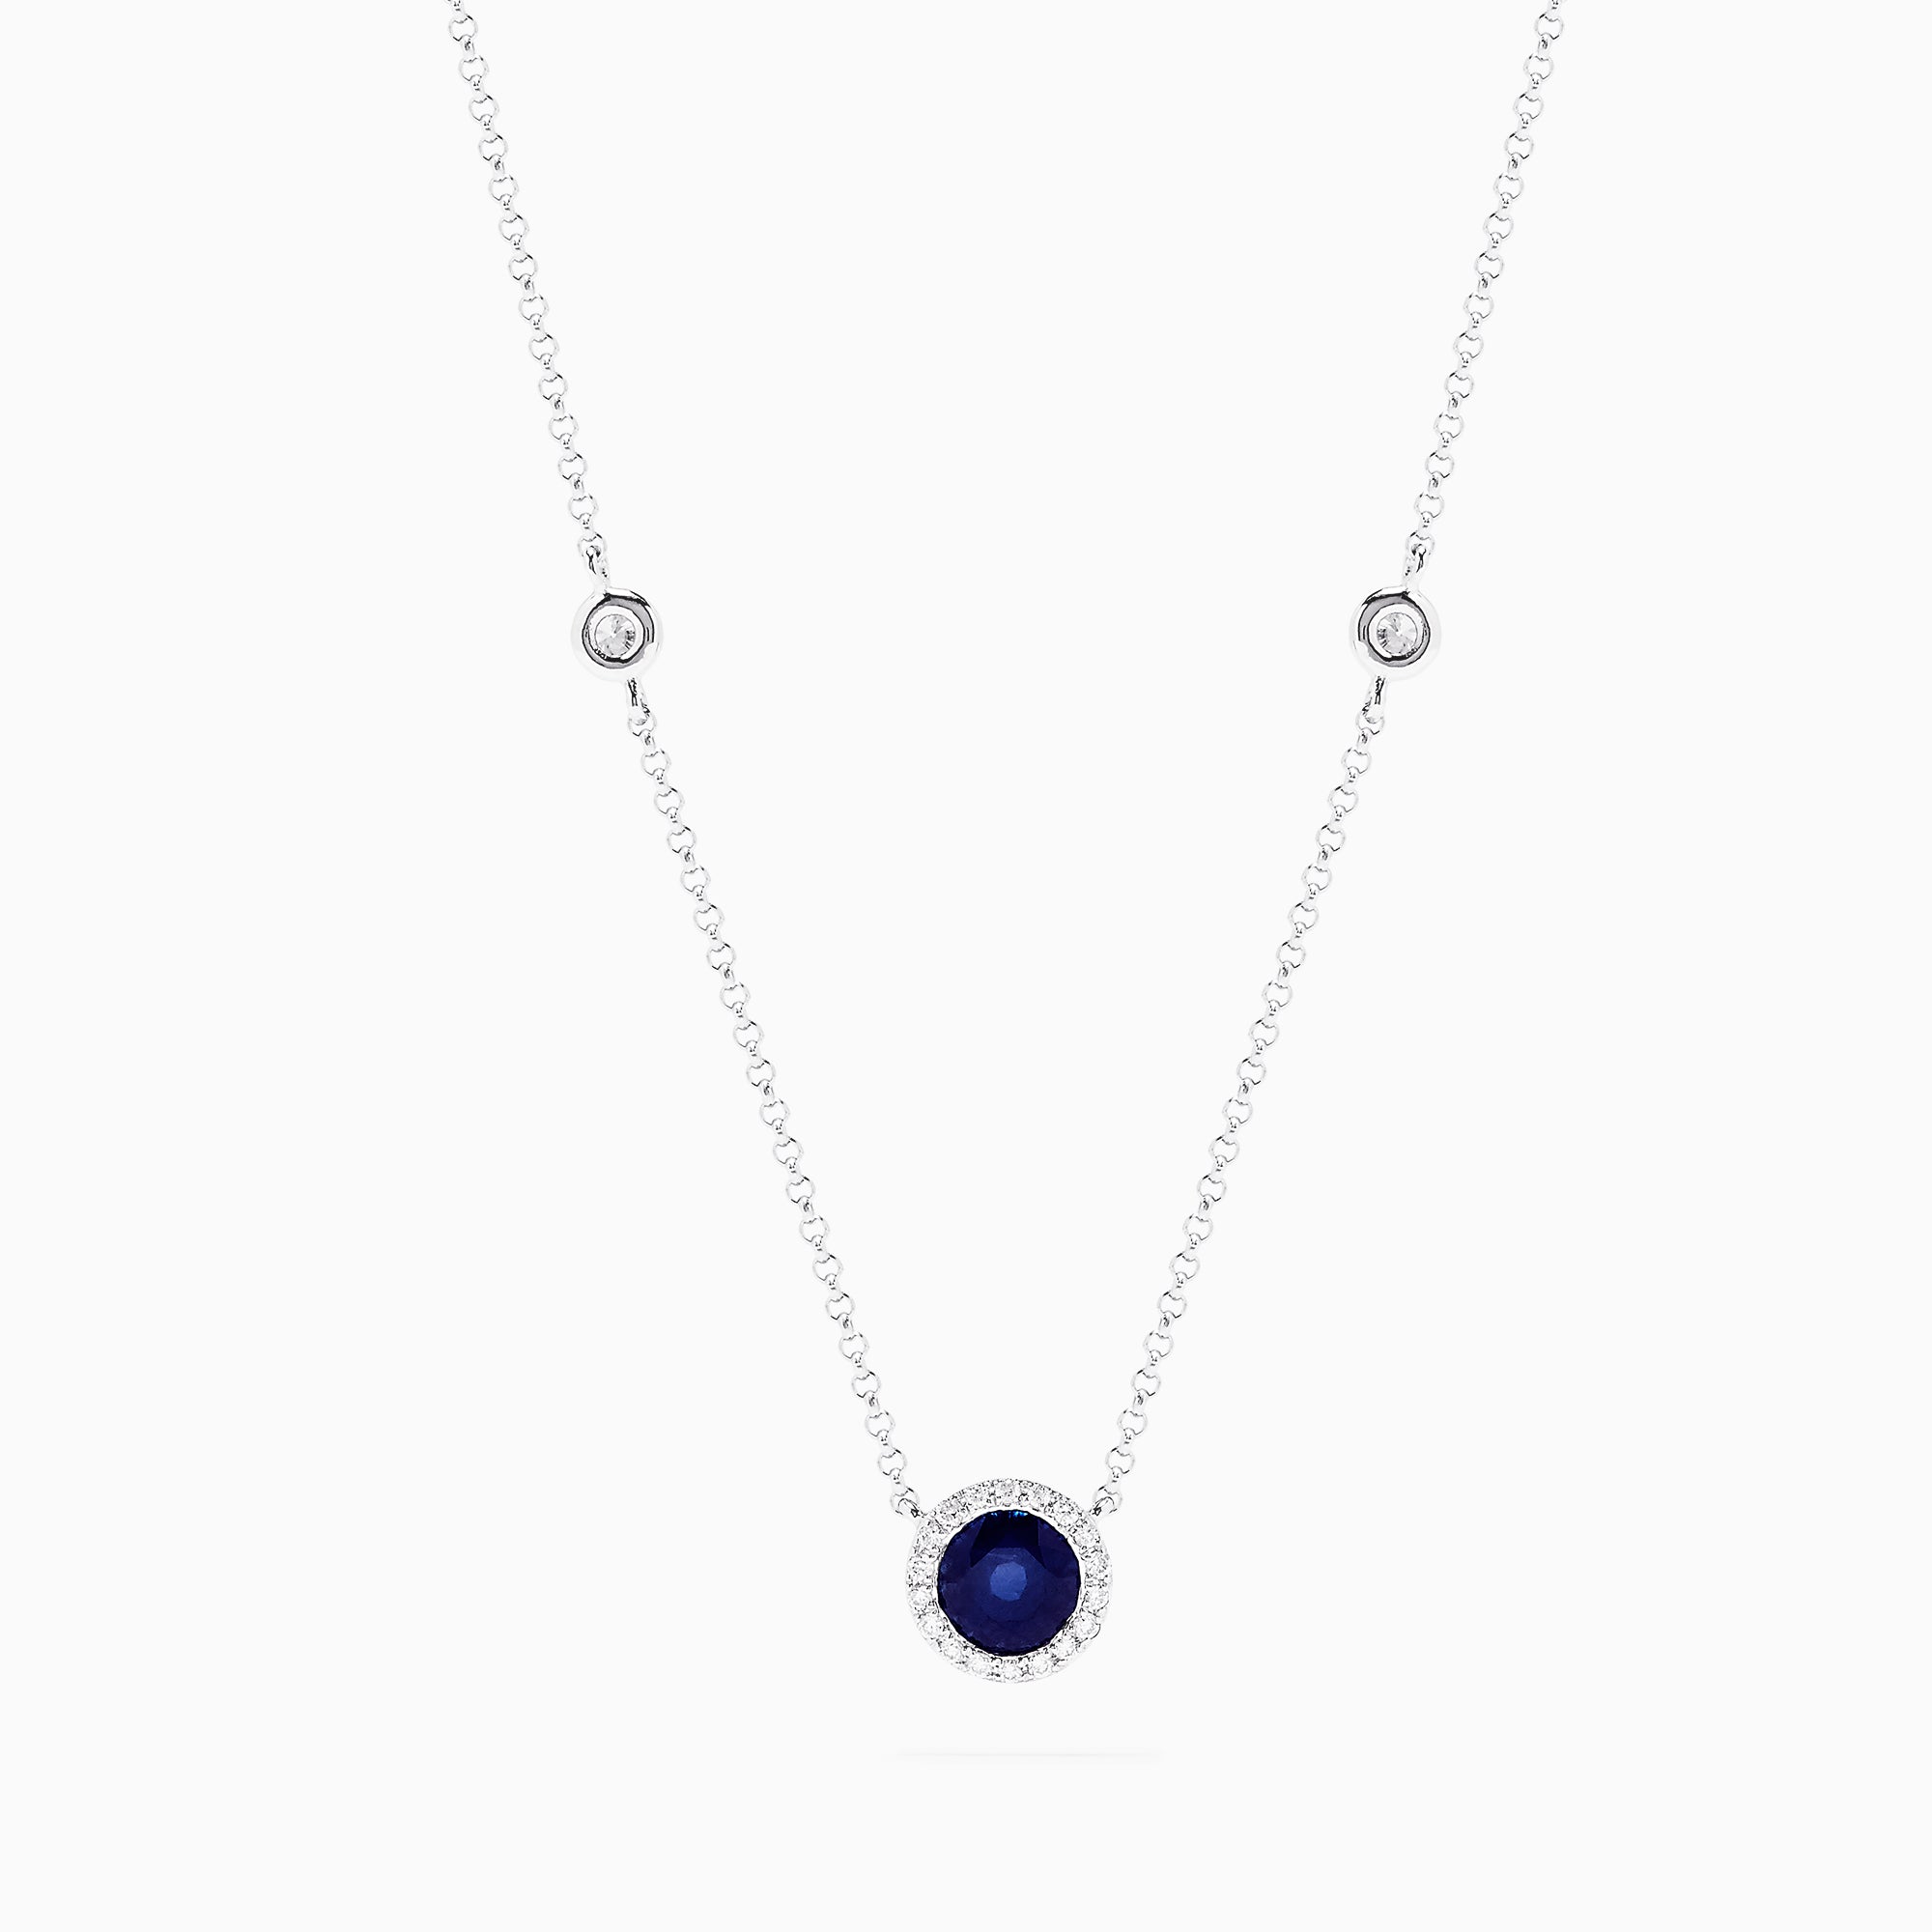 Effy 14K White Gold Blue Sapphire and Diamond Necklace, 1.02 TCW